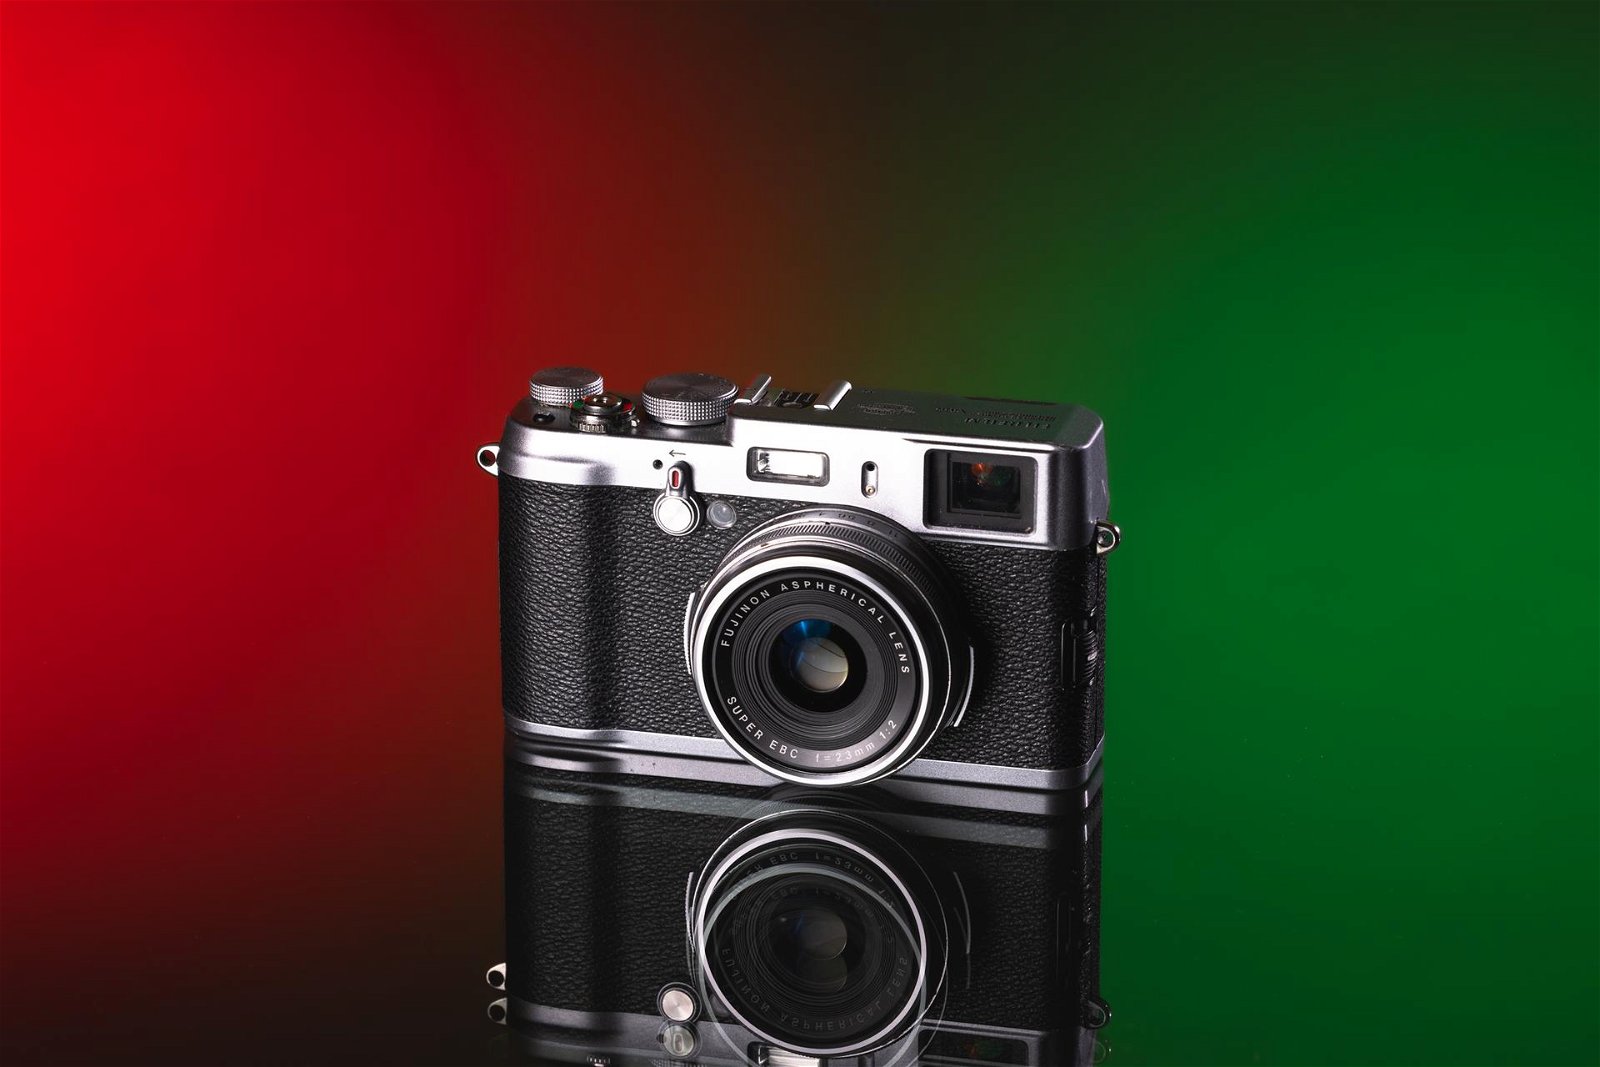 Top 12 Camera Gift Ideas for Photographers